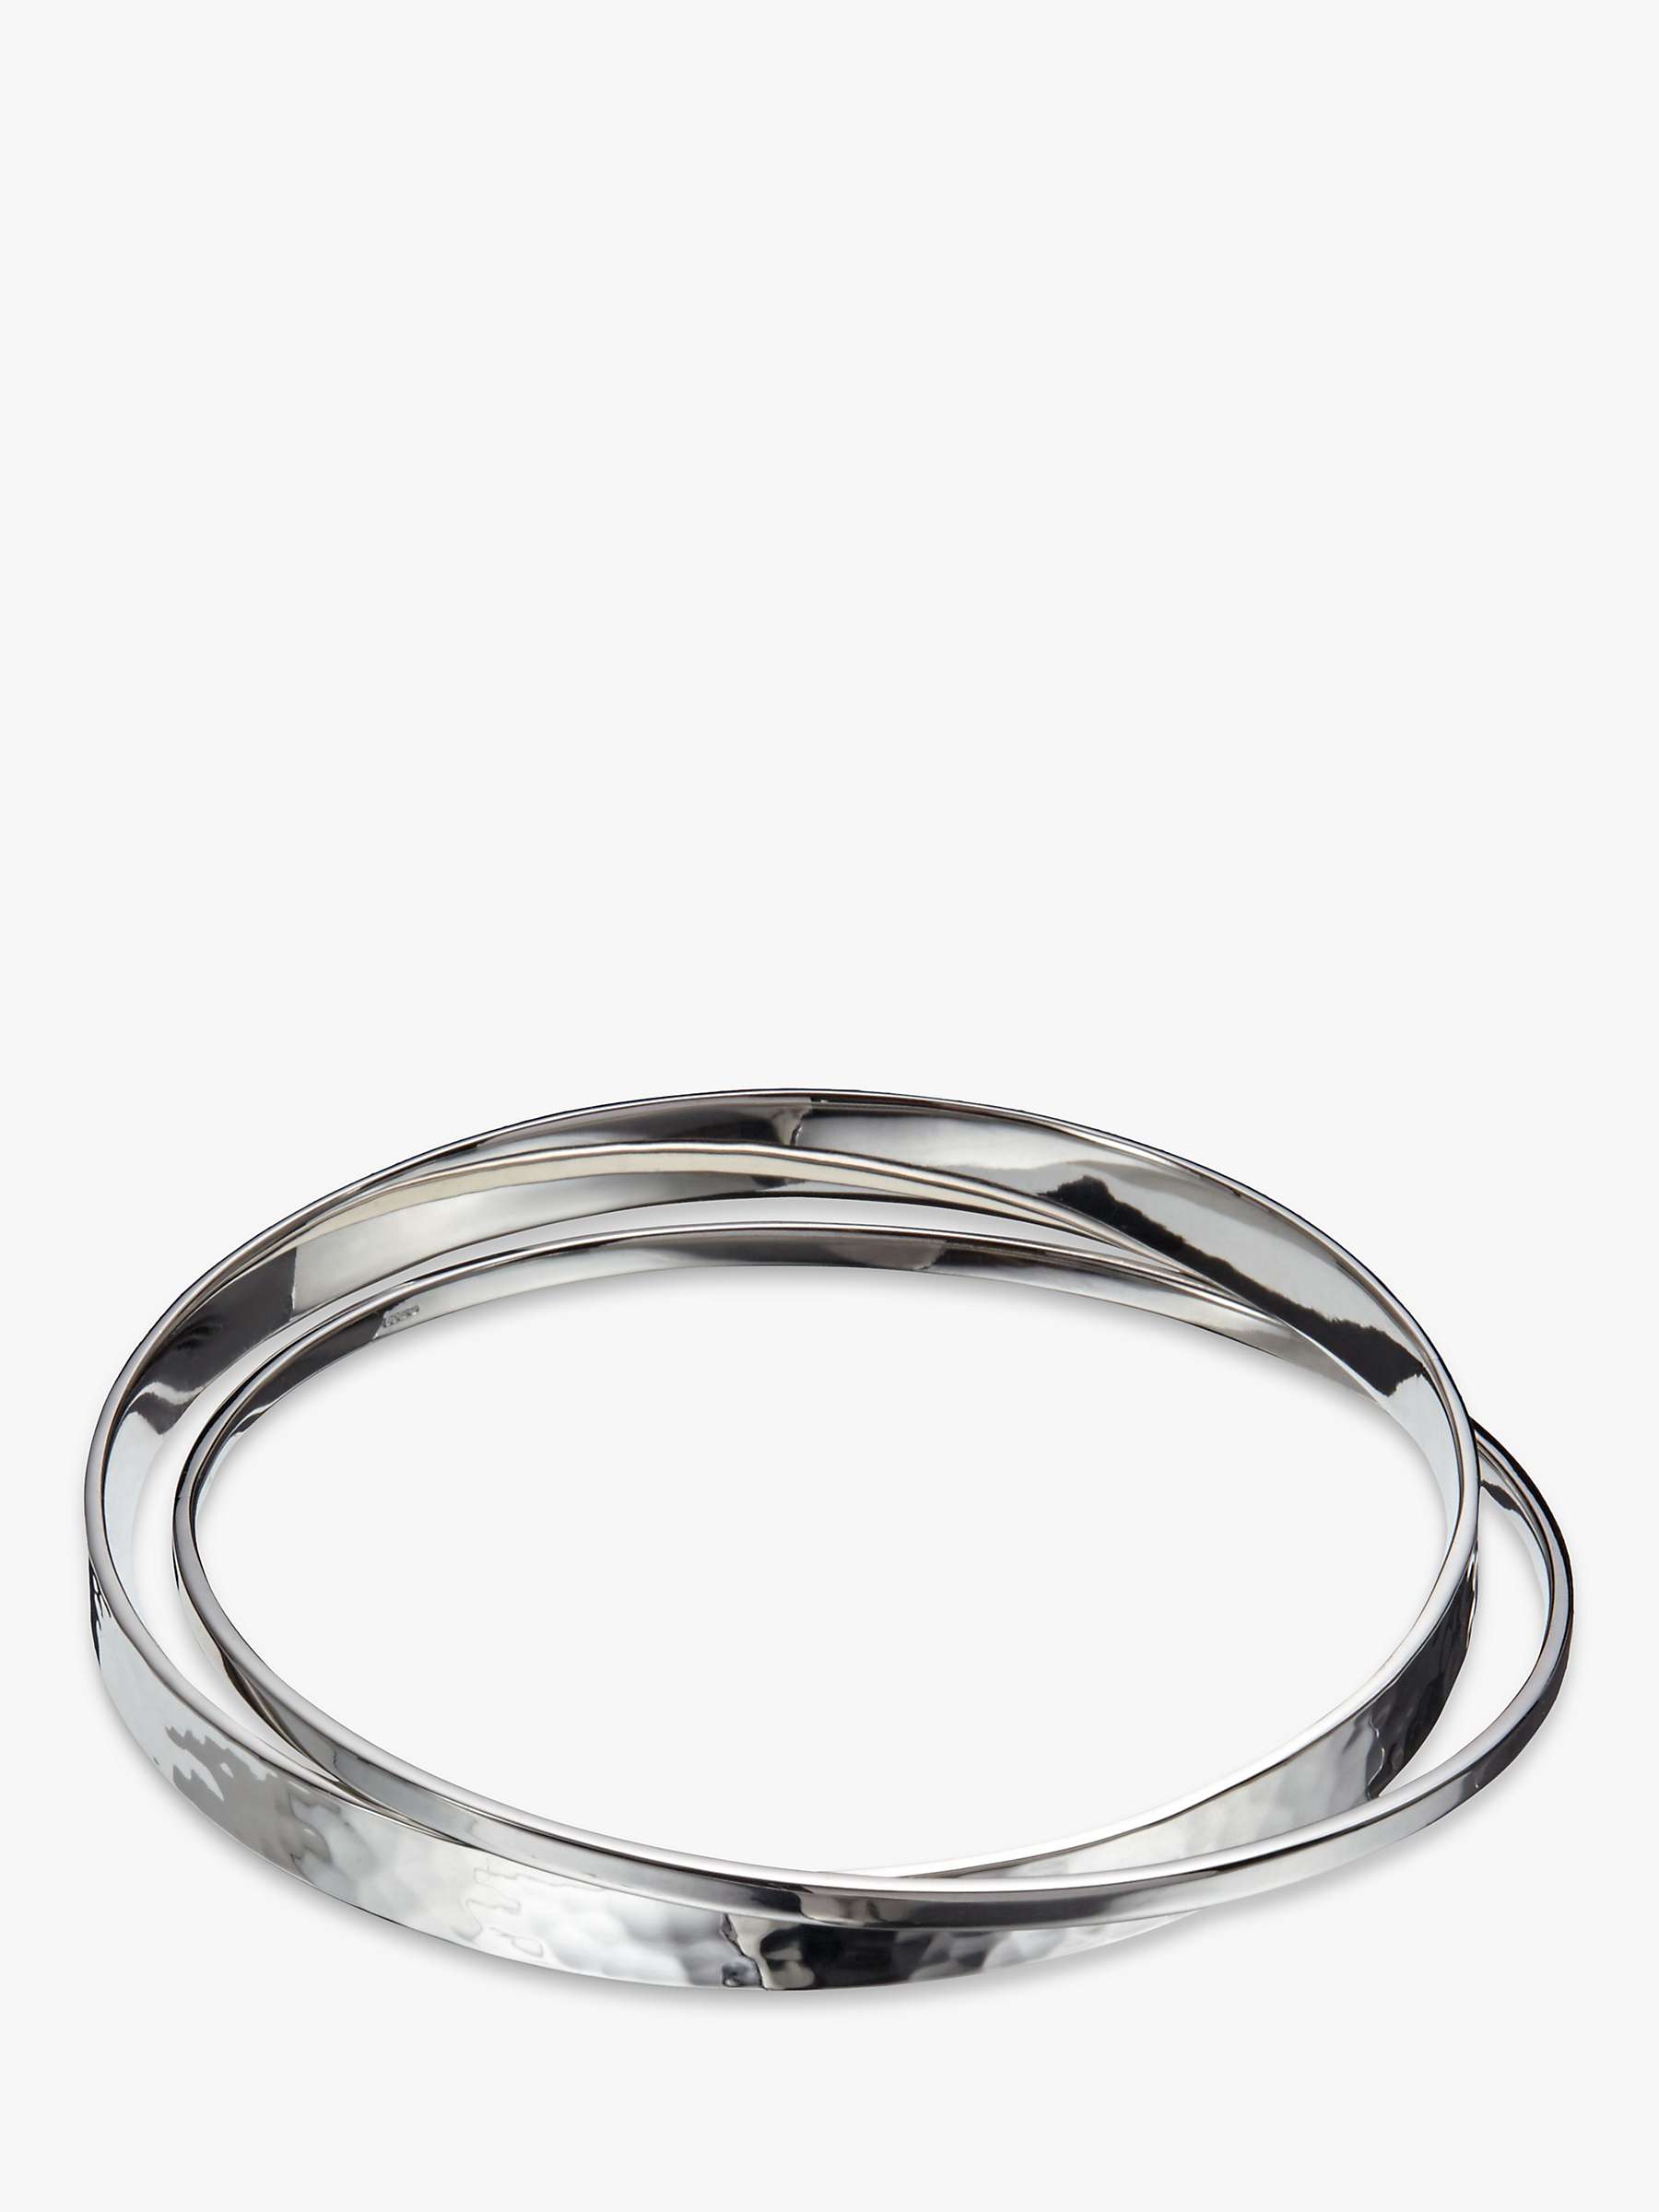 Buy Andea Sterling Silver Polished and Hammered Double Bangle, Silver Online at johnlewis.com